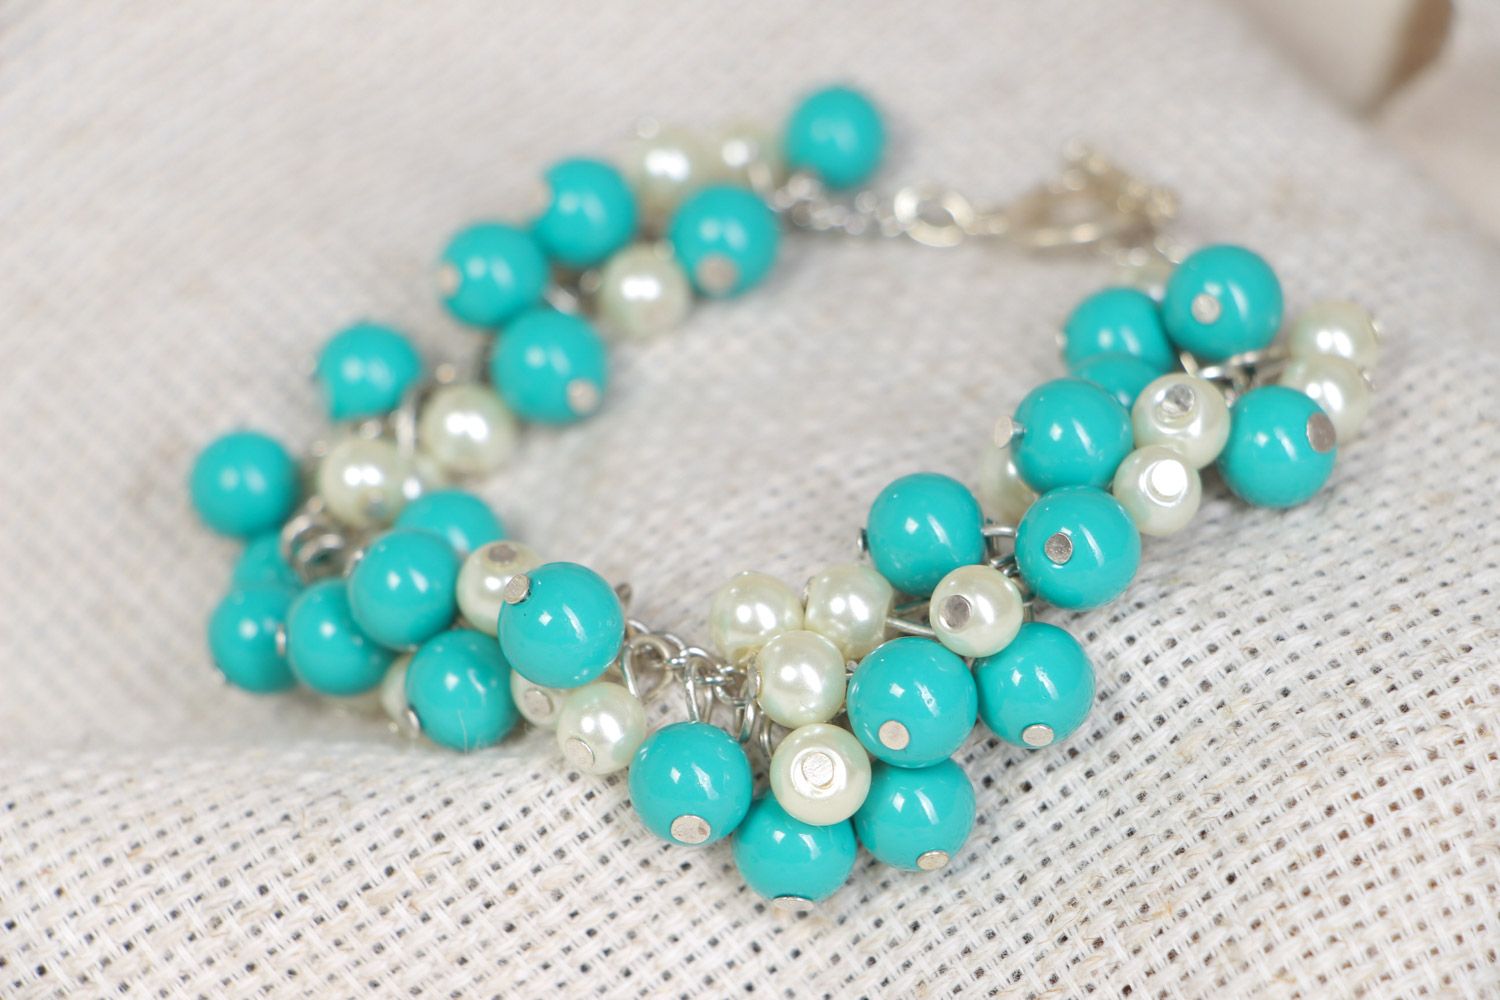 Handmade bright stylish beaded wrist bracelet with charms of turquoise and white colors photo 1